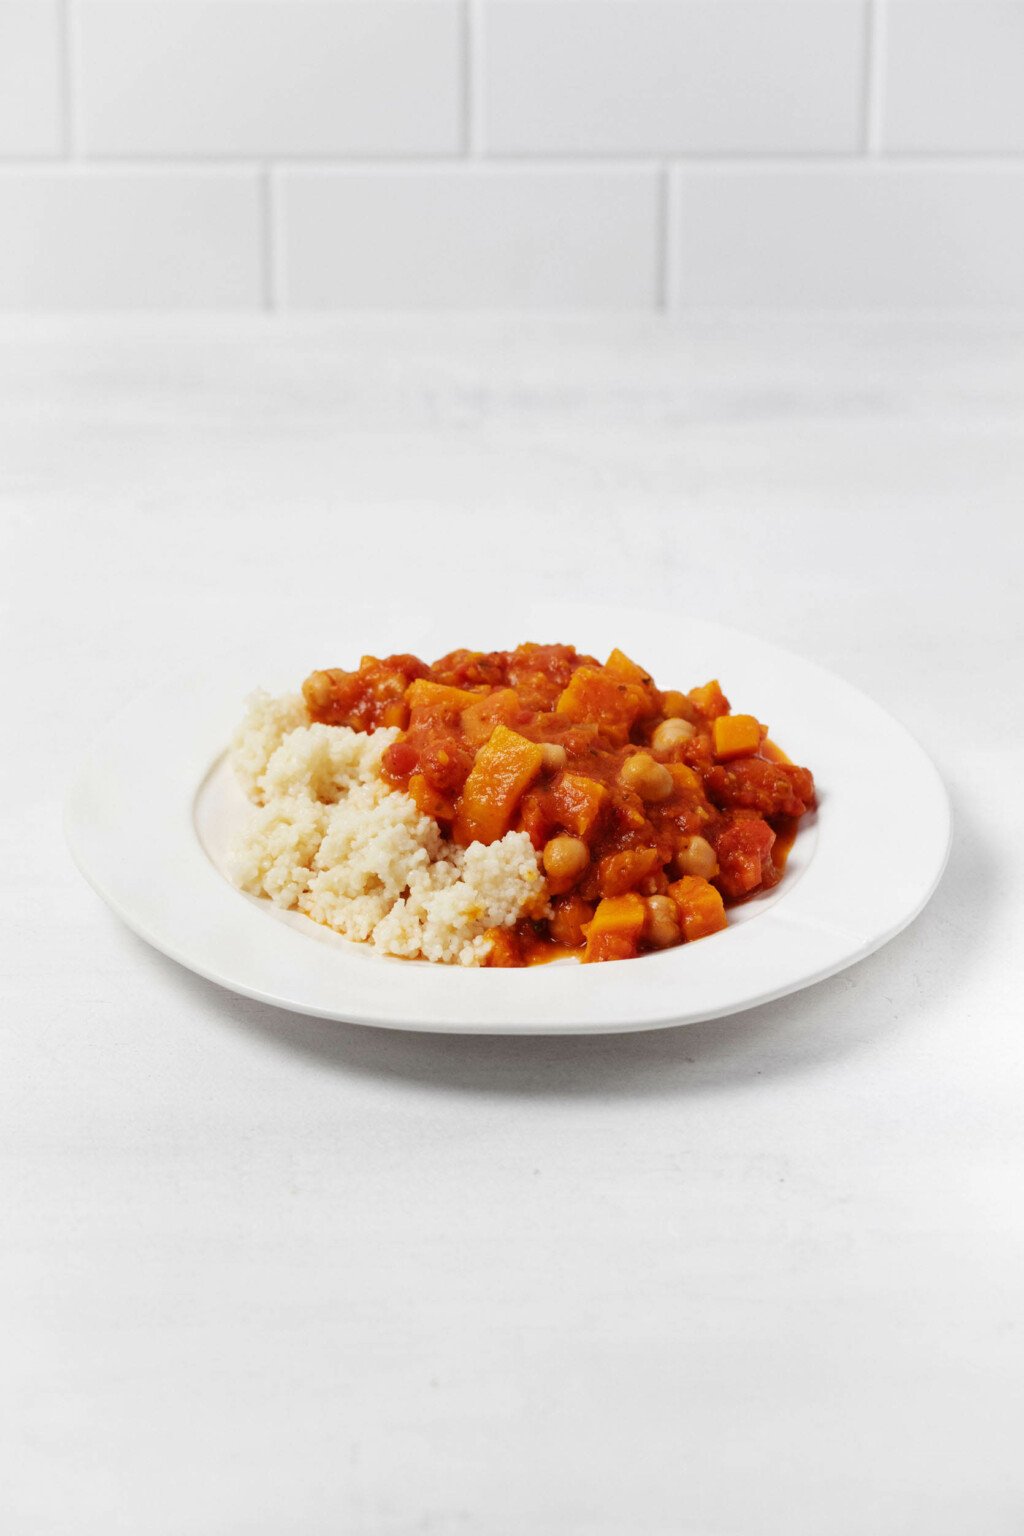 A rimmed, round white plate rests on a white surface. It's covered with a mixture of tomatoes, squash, and chickpeas.